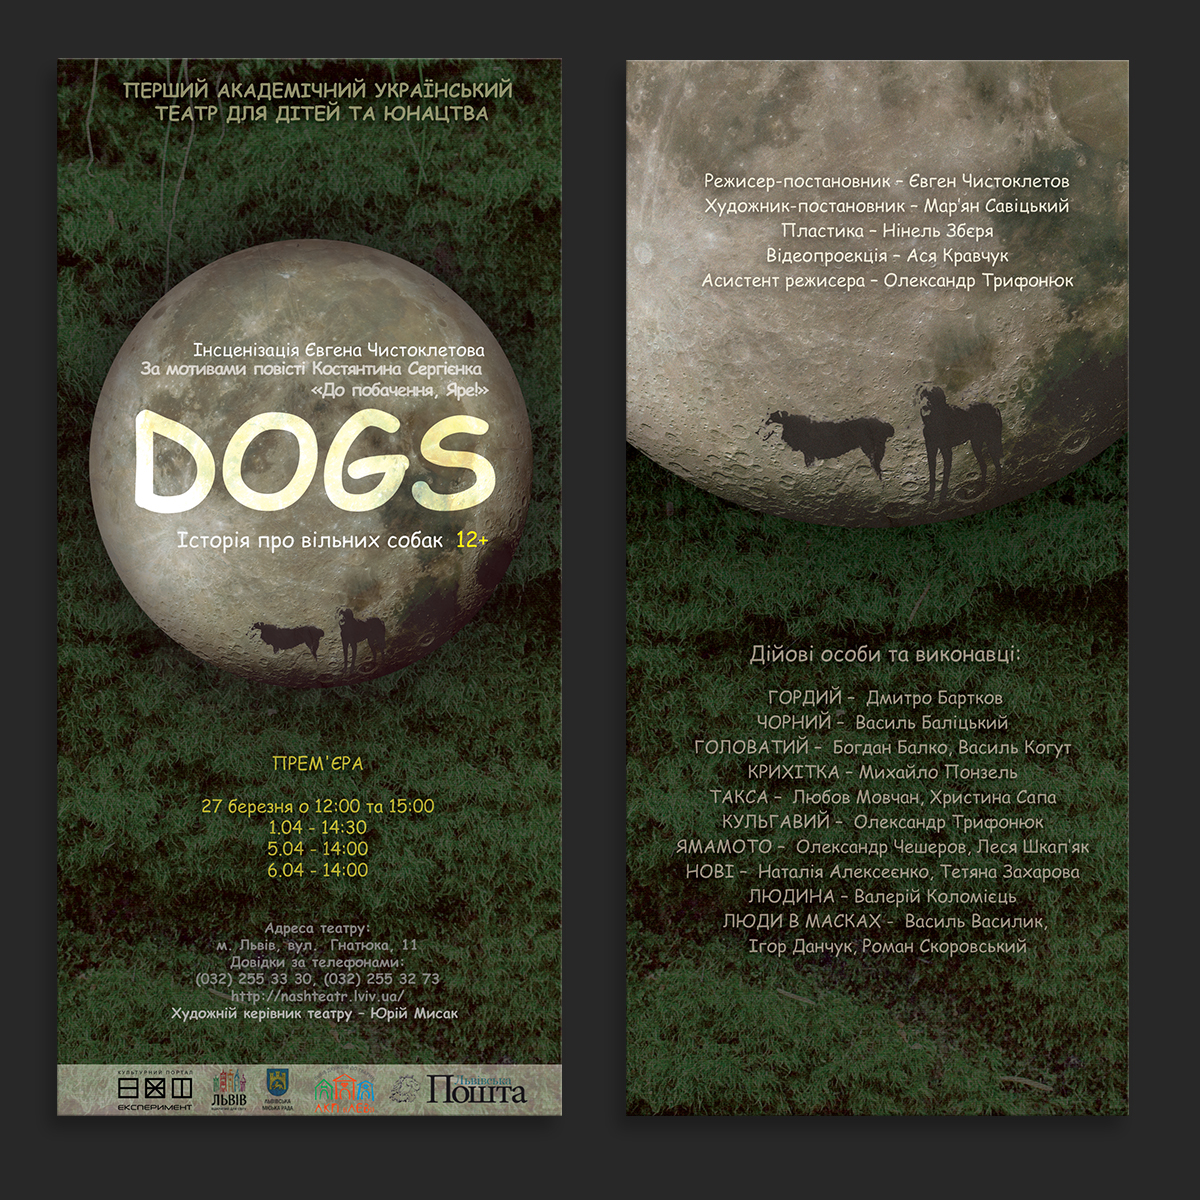 play Theatre poster flyer print dogs histrionics video projection Performance